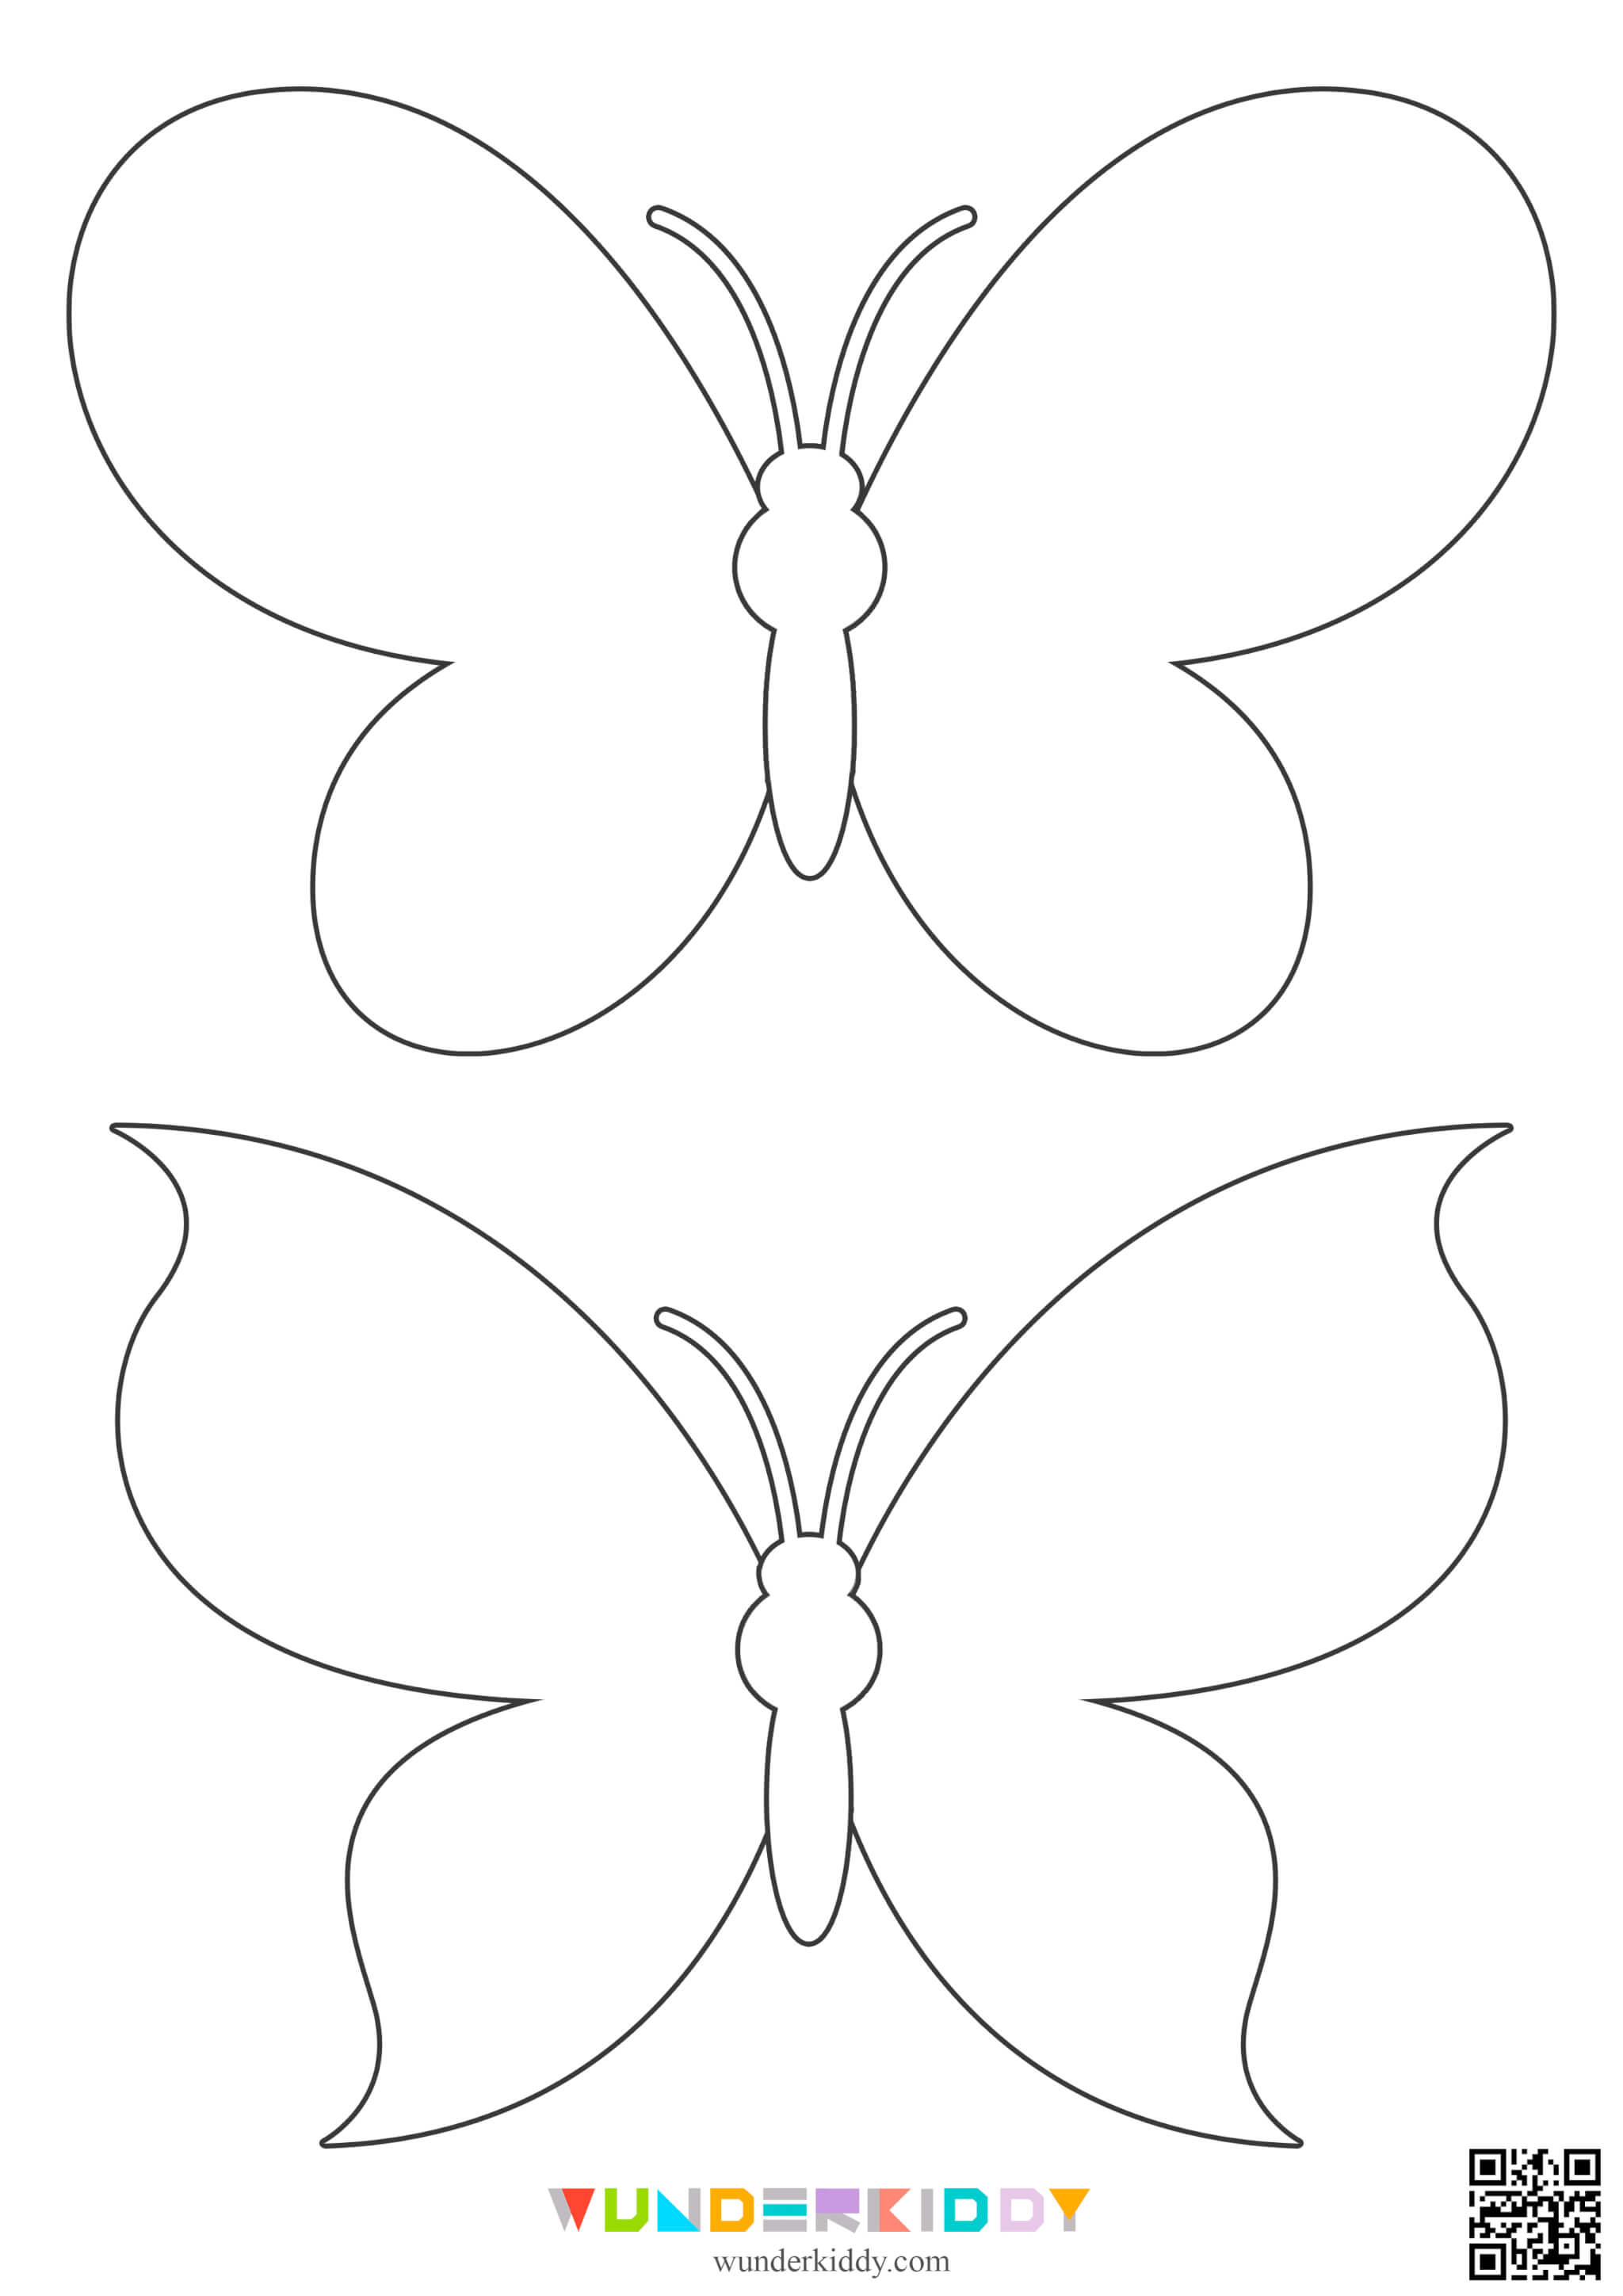 Template «Butterfly» - Image 3